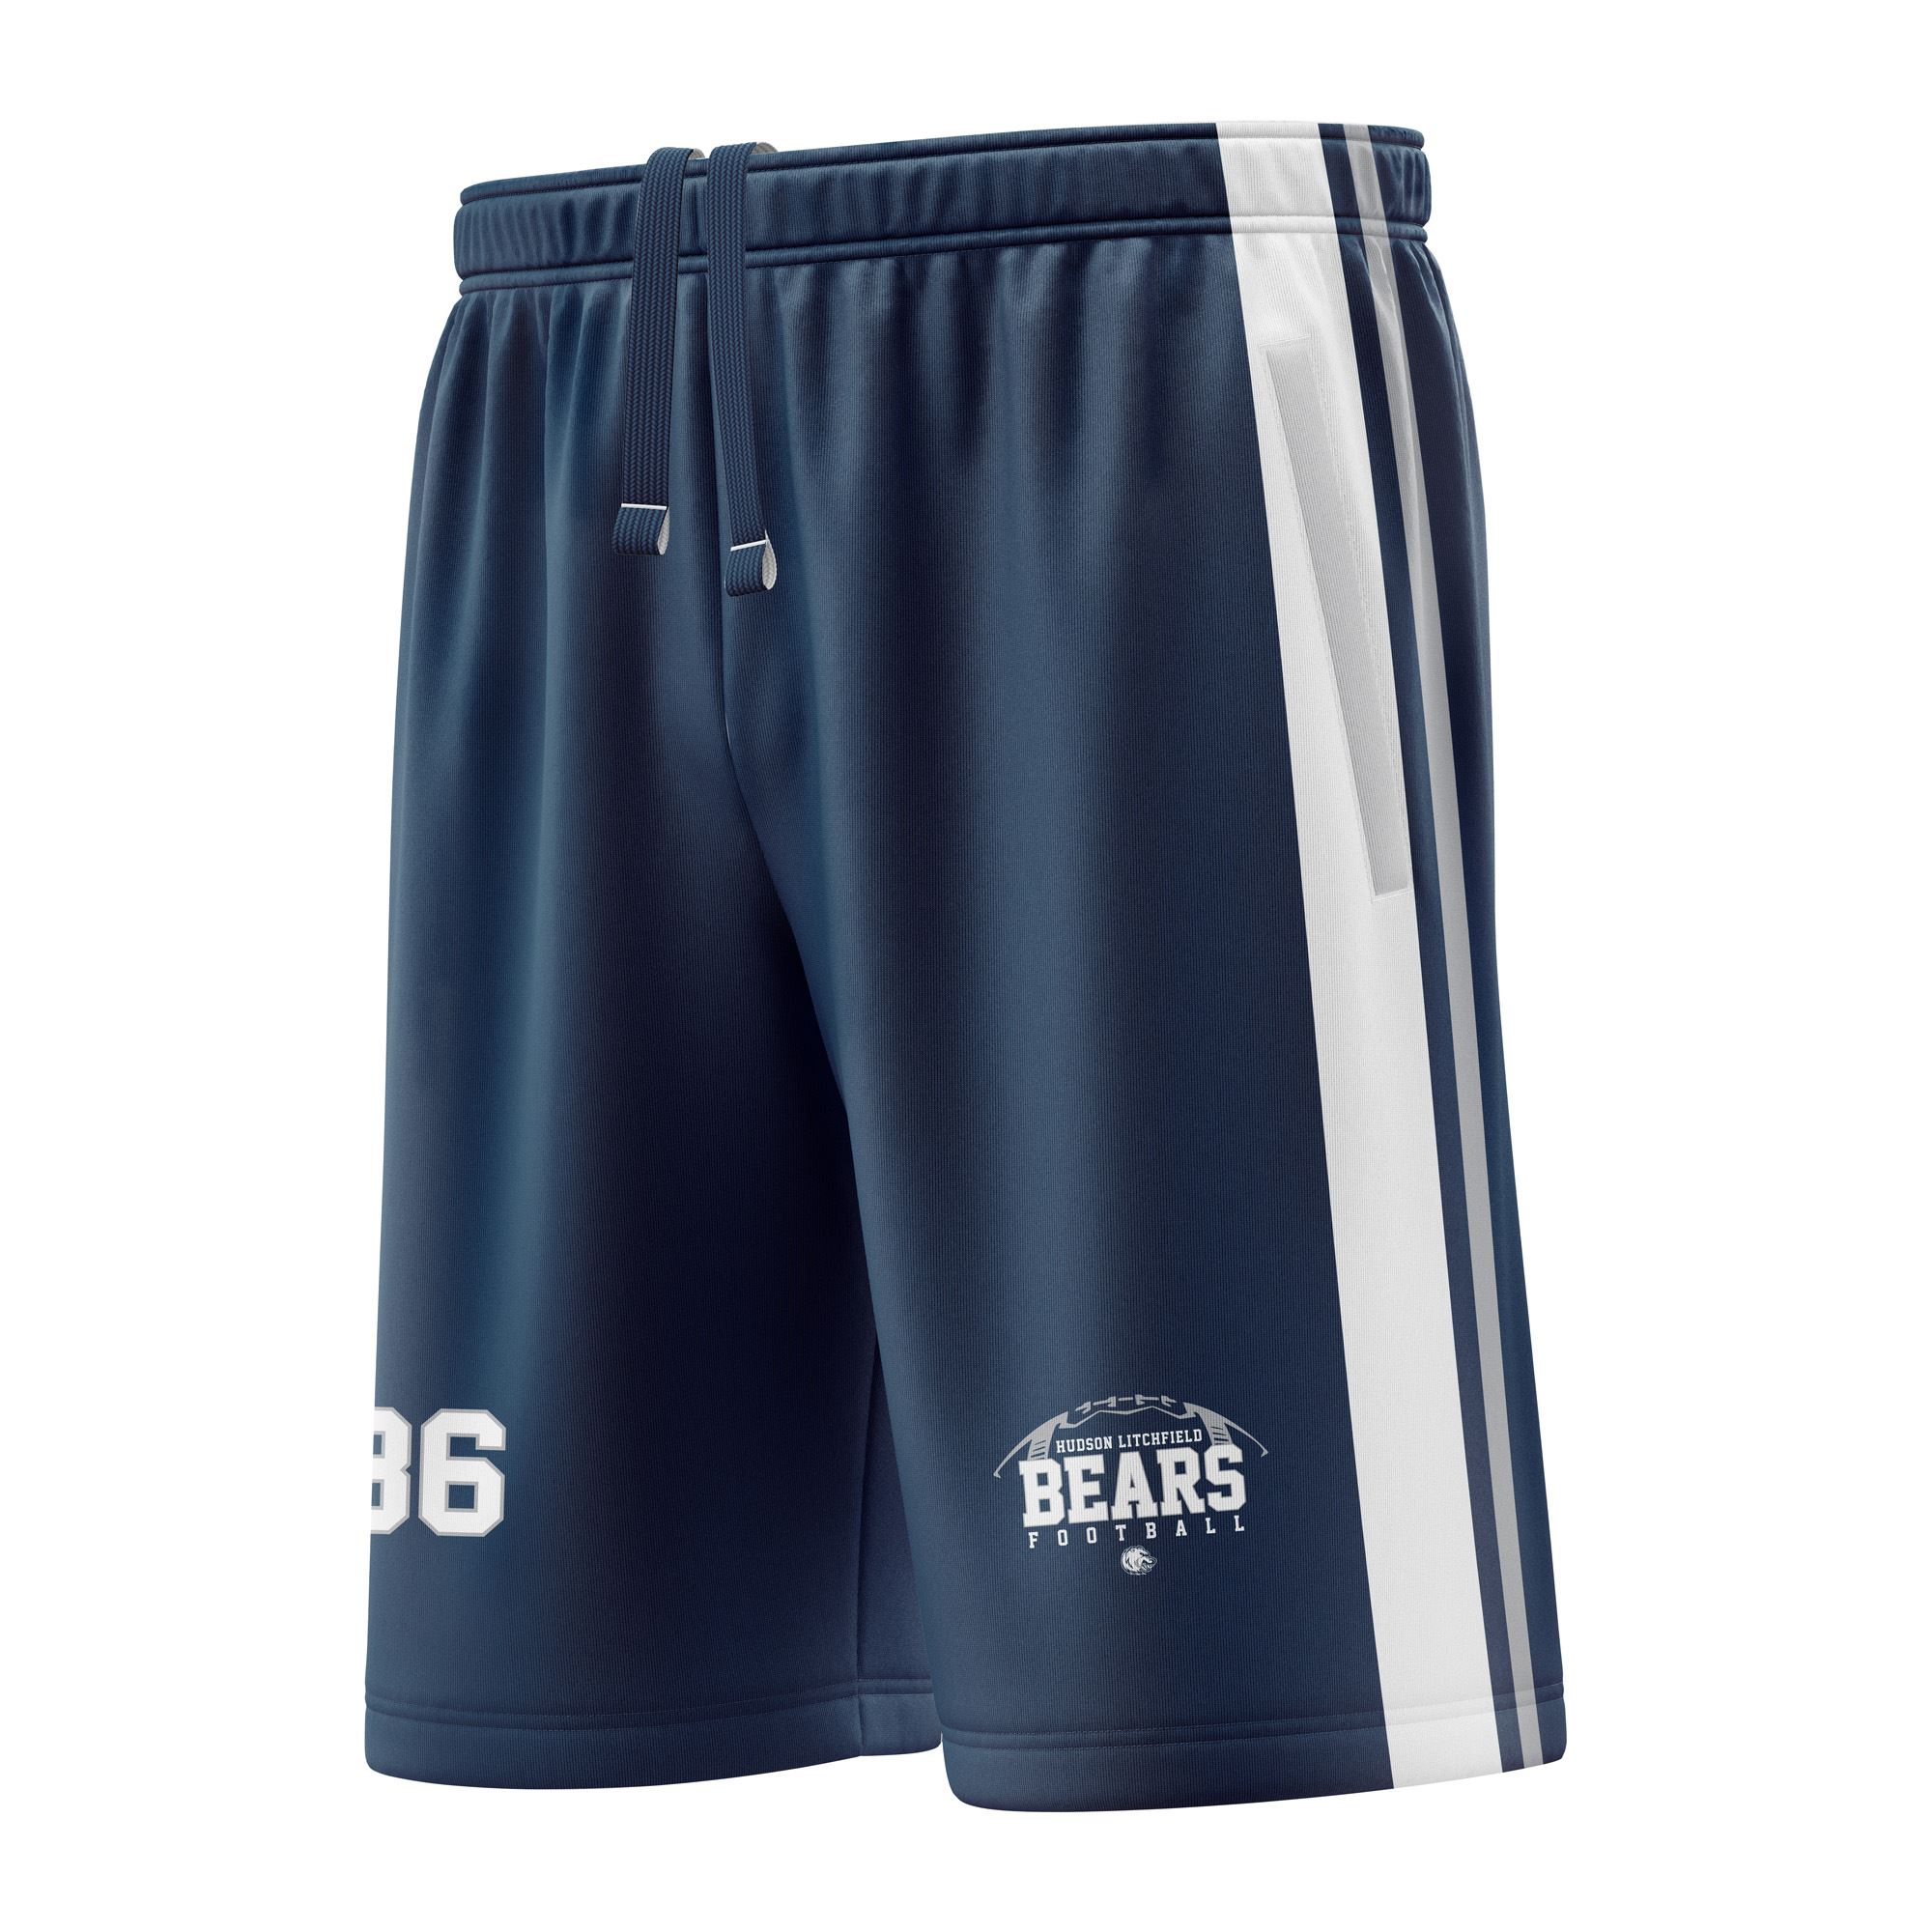 Hudson Litchfield Bears Full Dye Sublimated Shorts with Pockets